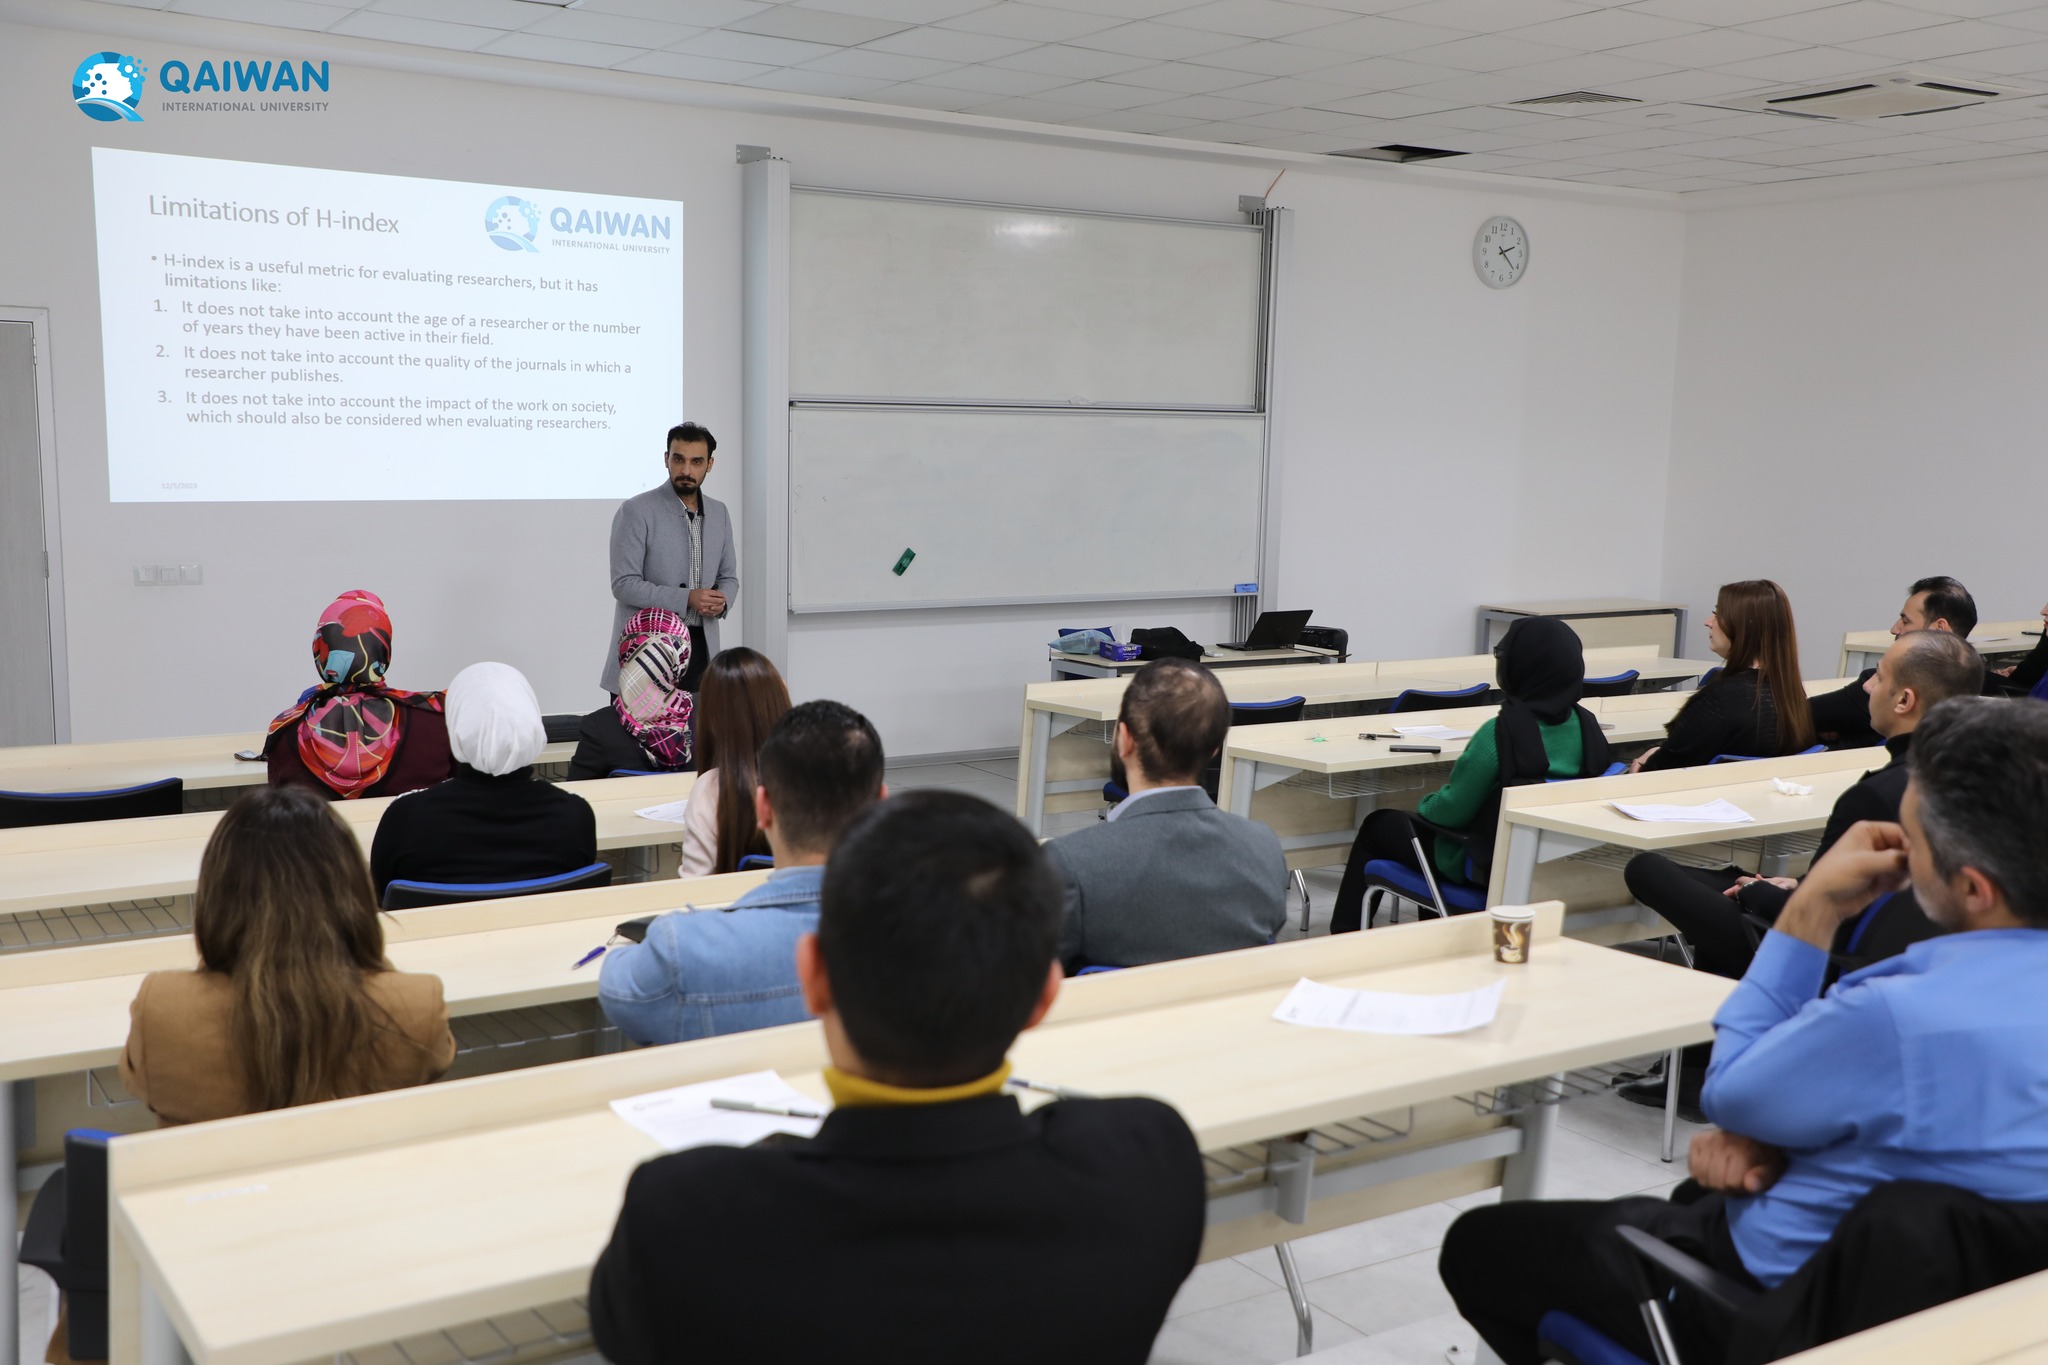 A workshop on the impact of agentic limitations on research work was conducted by Dr. Zaid